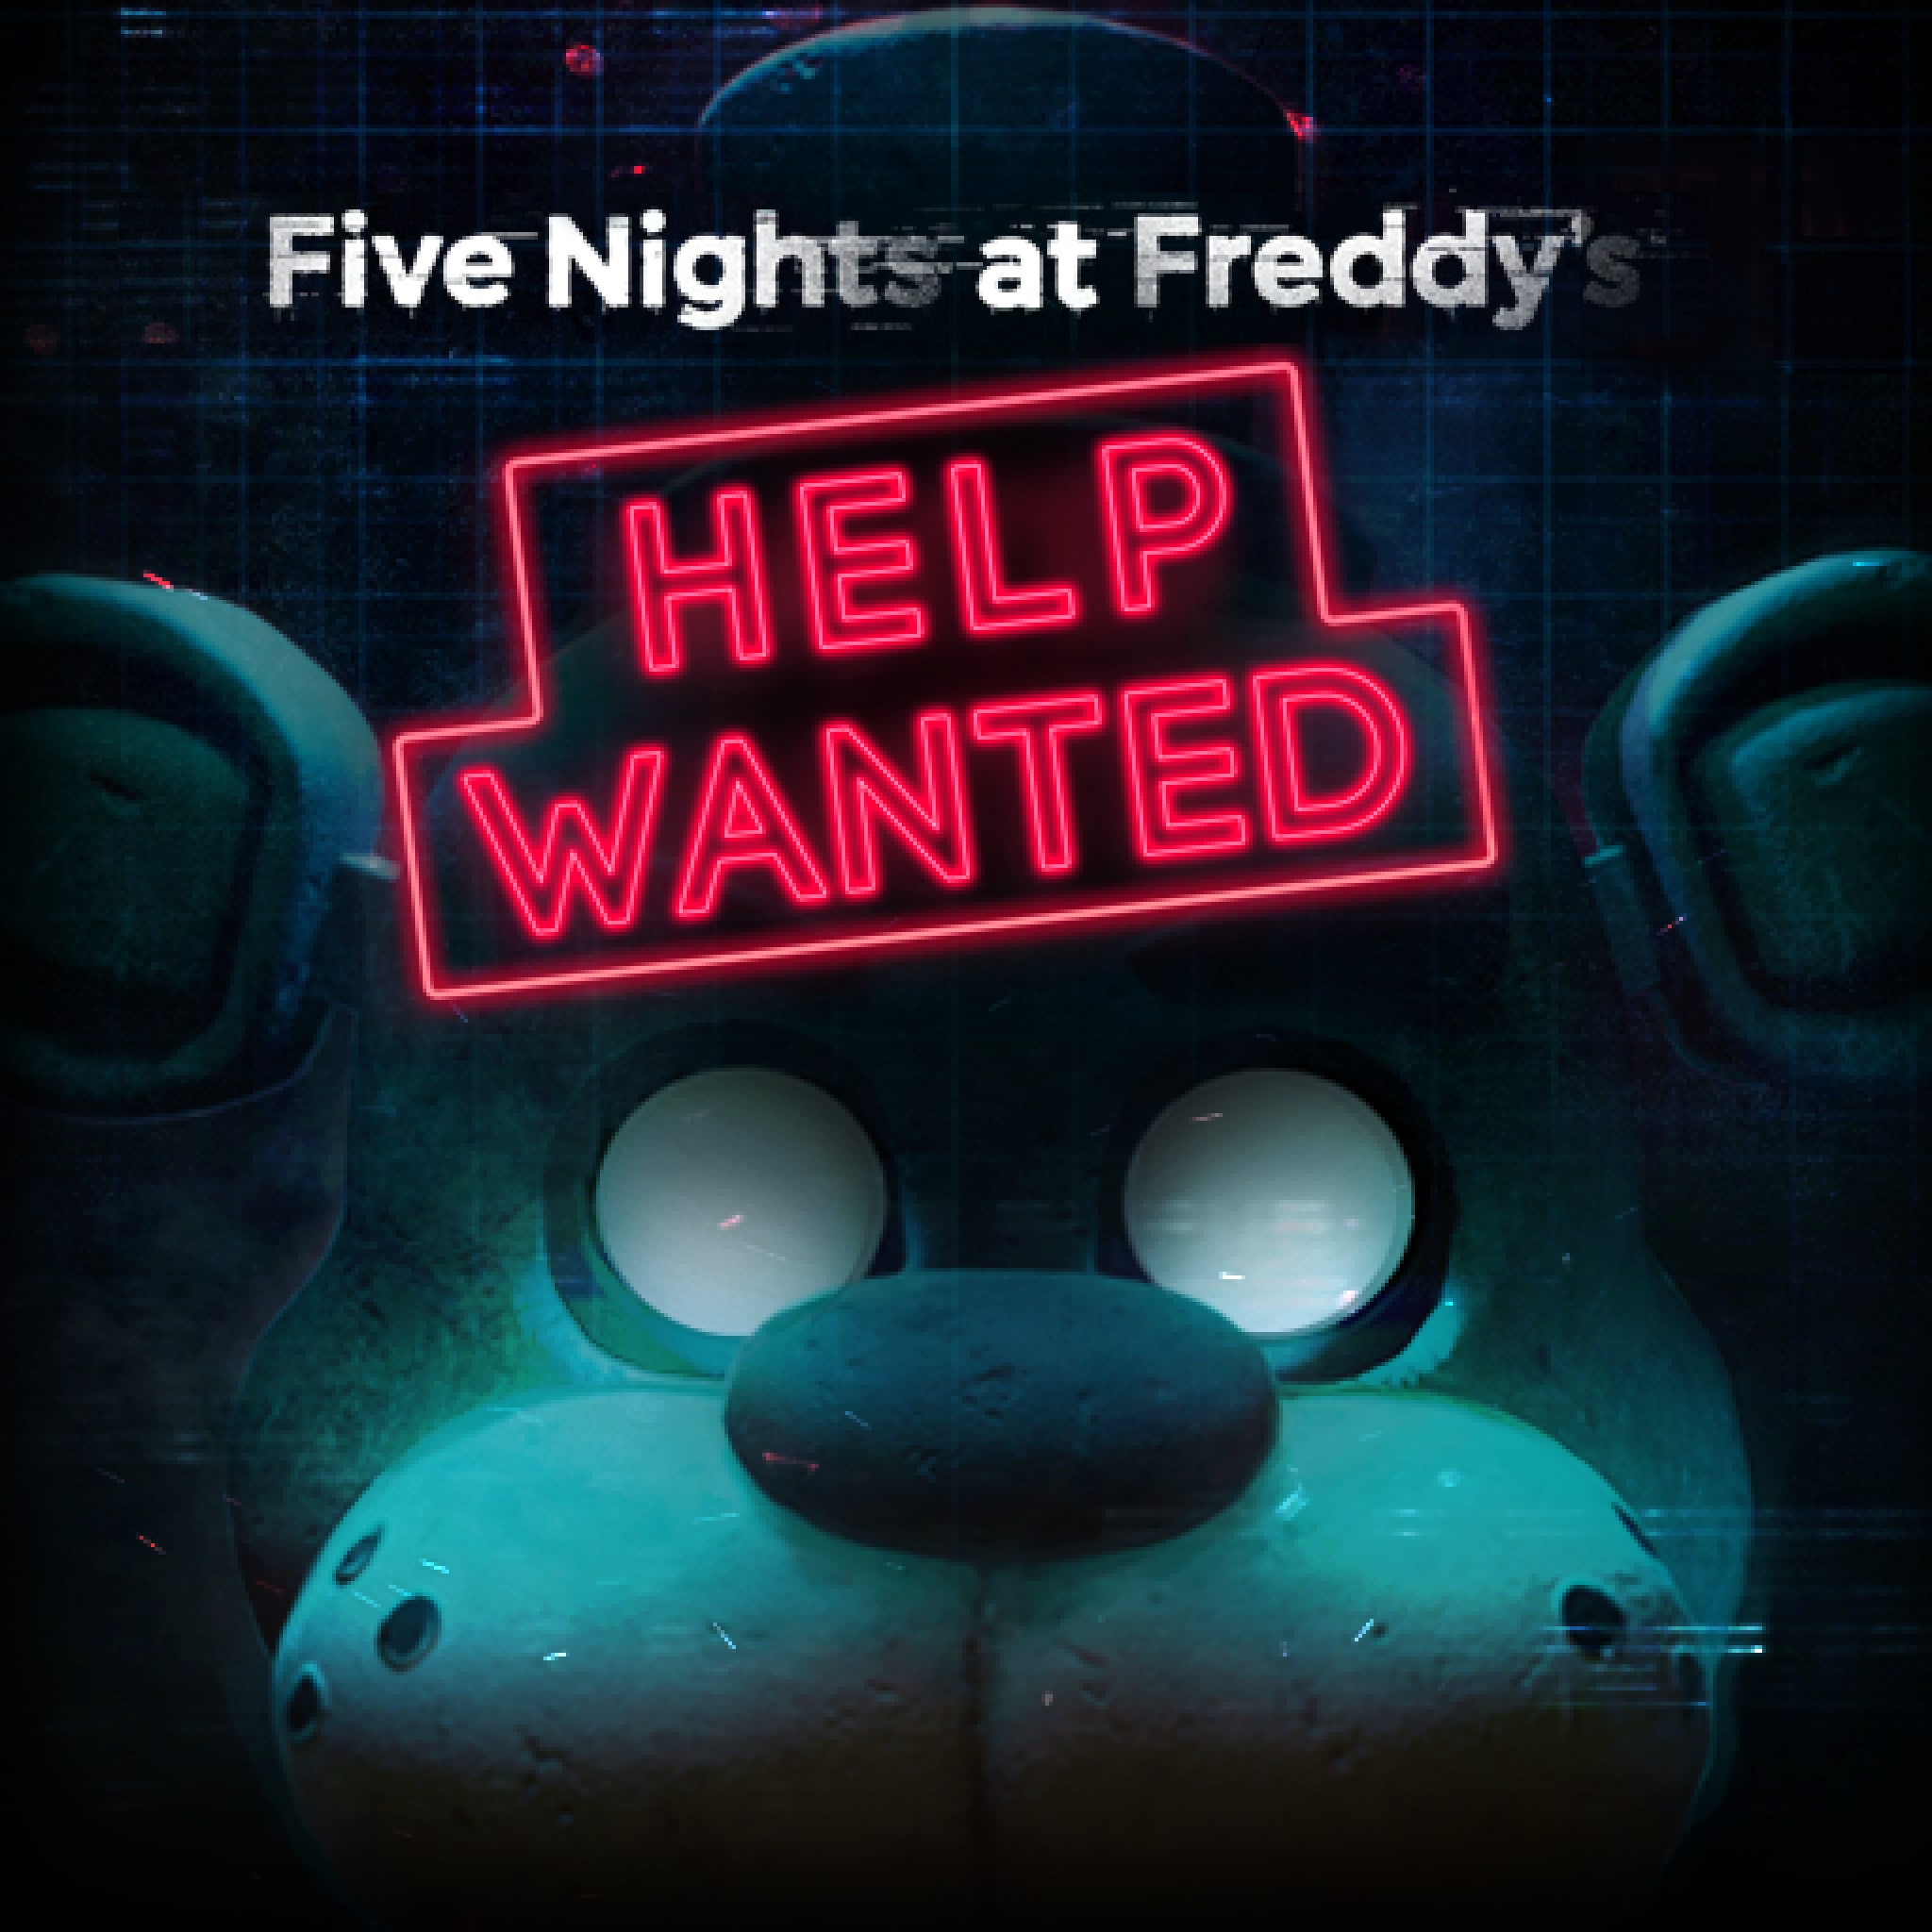 ps4 five nights at freddy's game